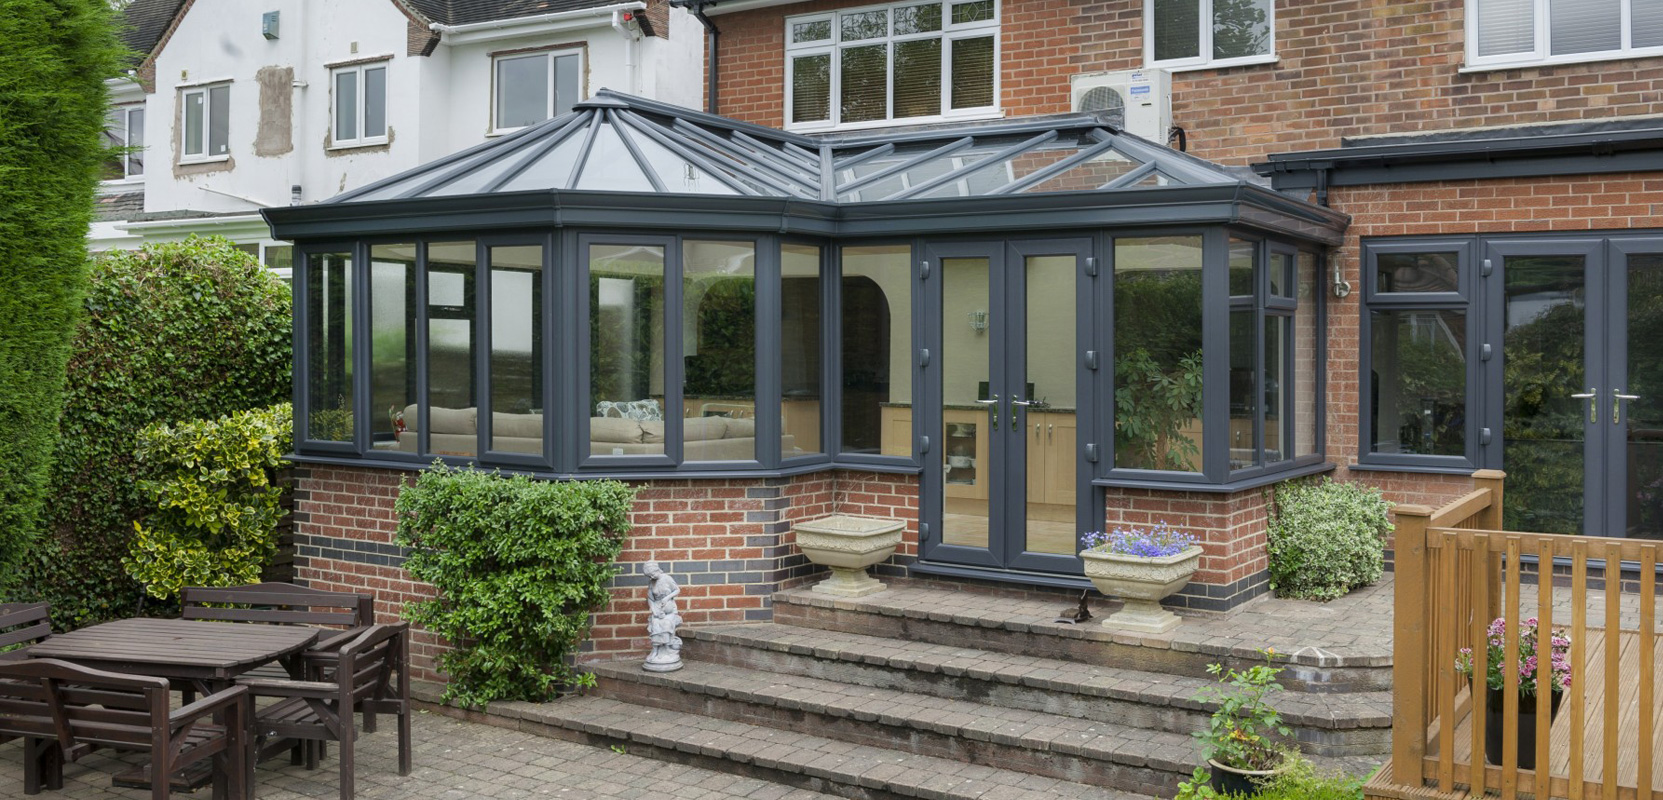 Photo of an P-shaped conservatory